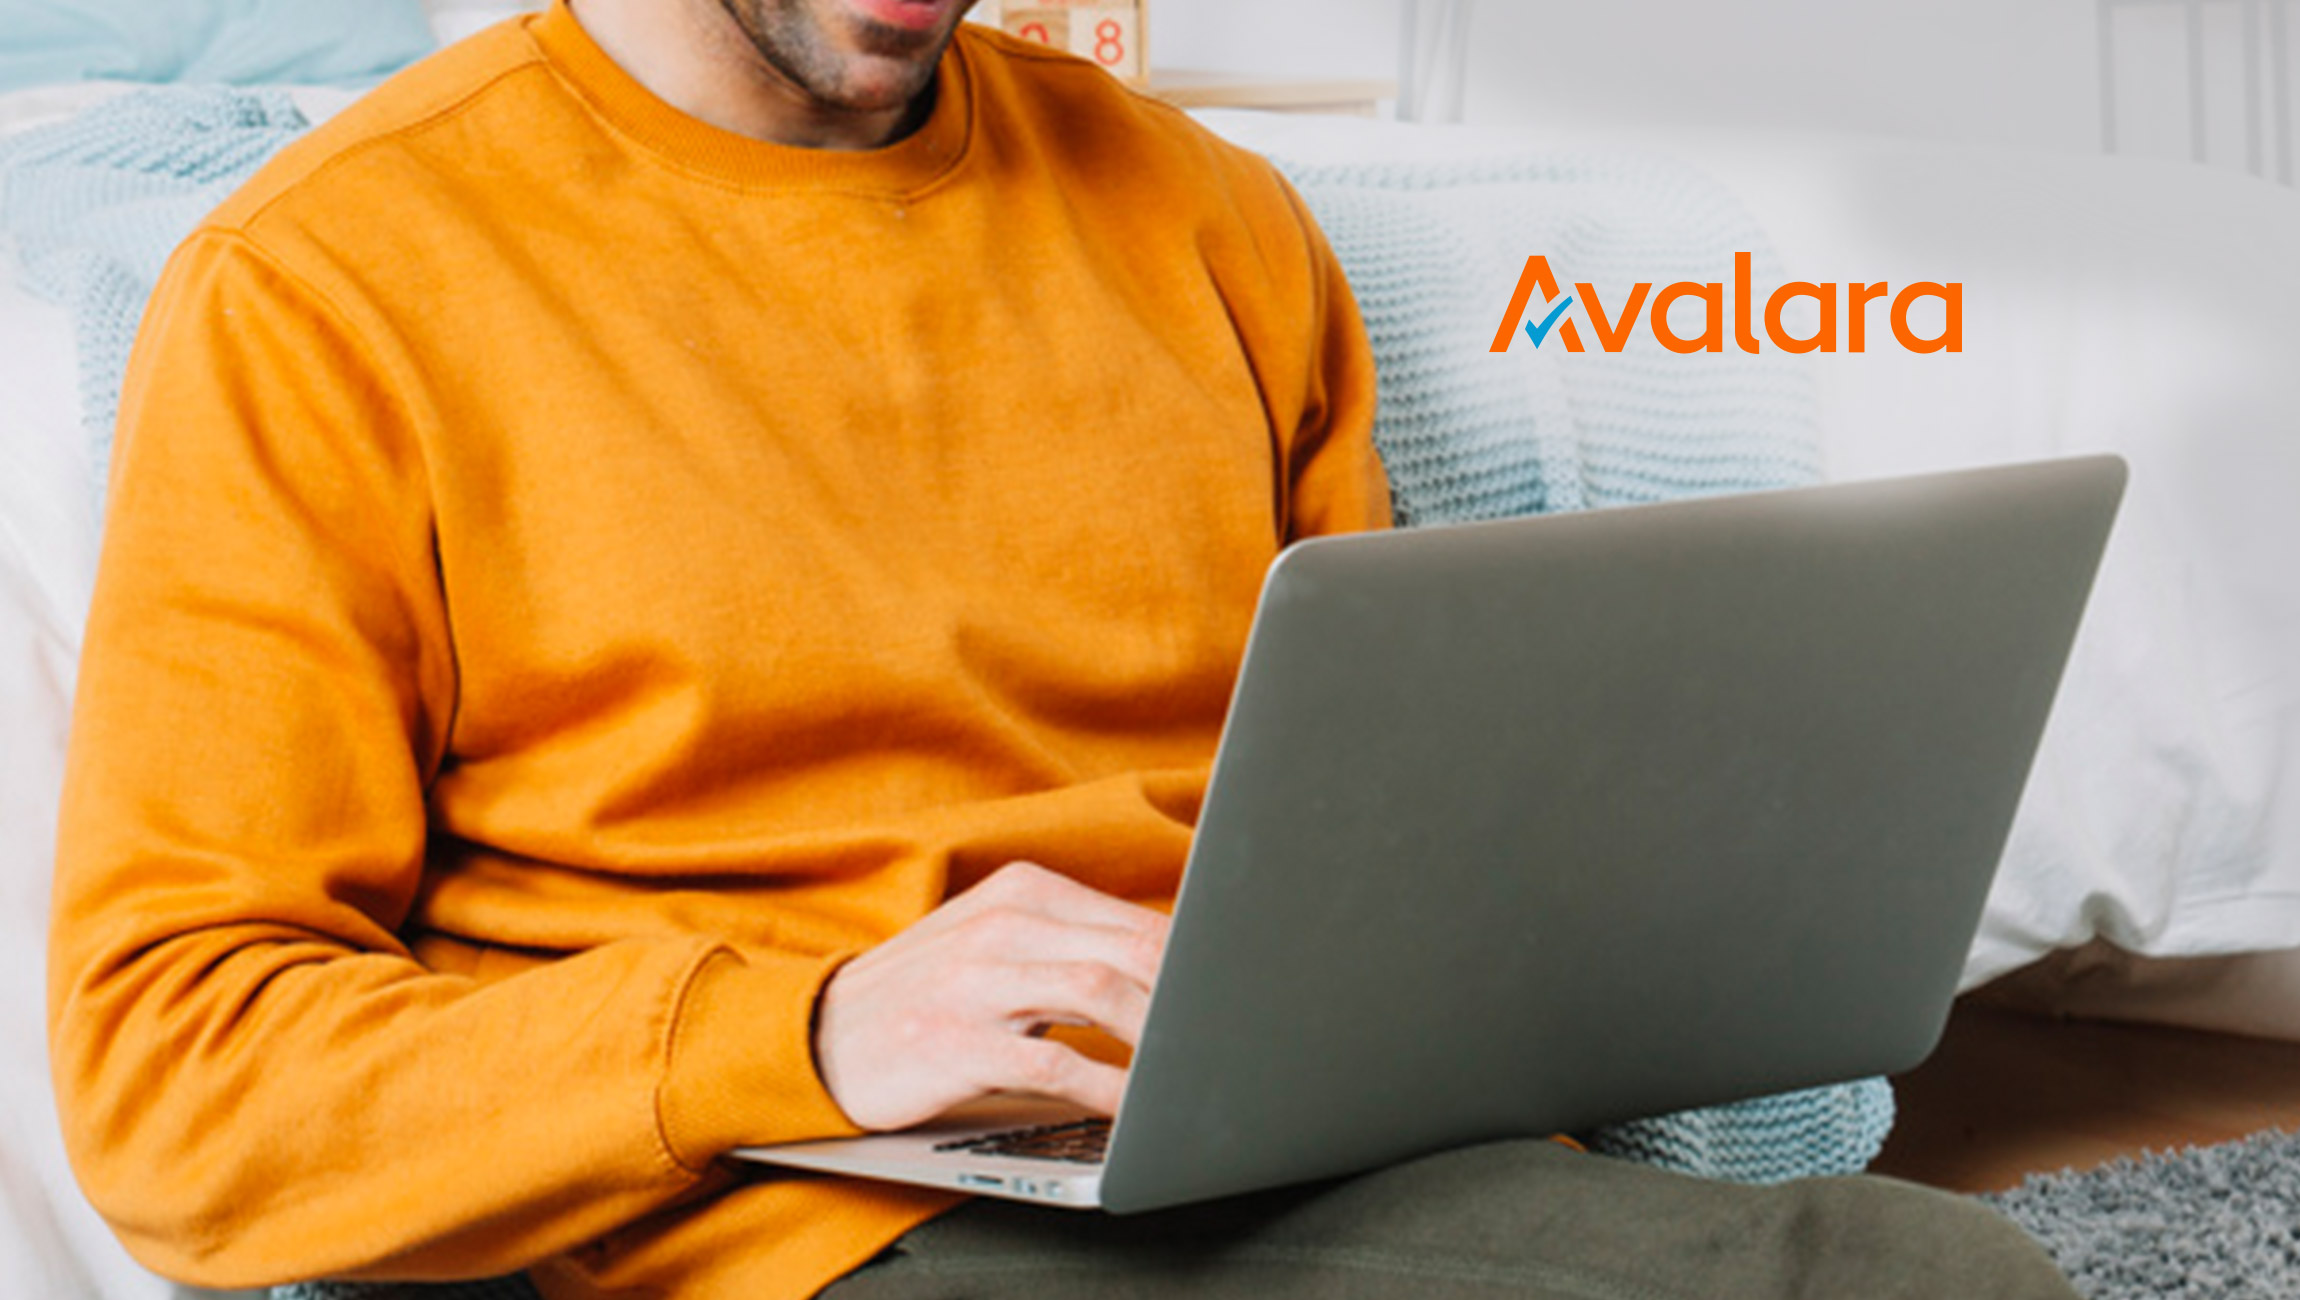 Avalara Announces Low-Code Developer Tools and New APIs to Embed Compliance into Business Applications and Ecommerce Platforms